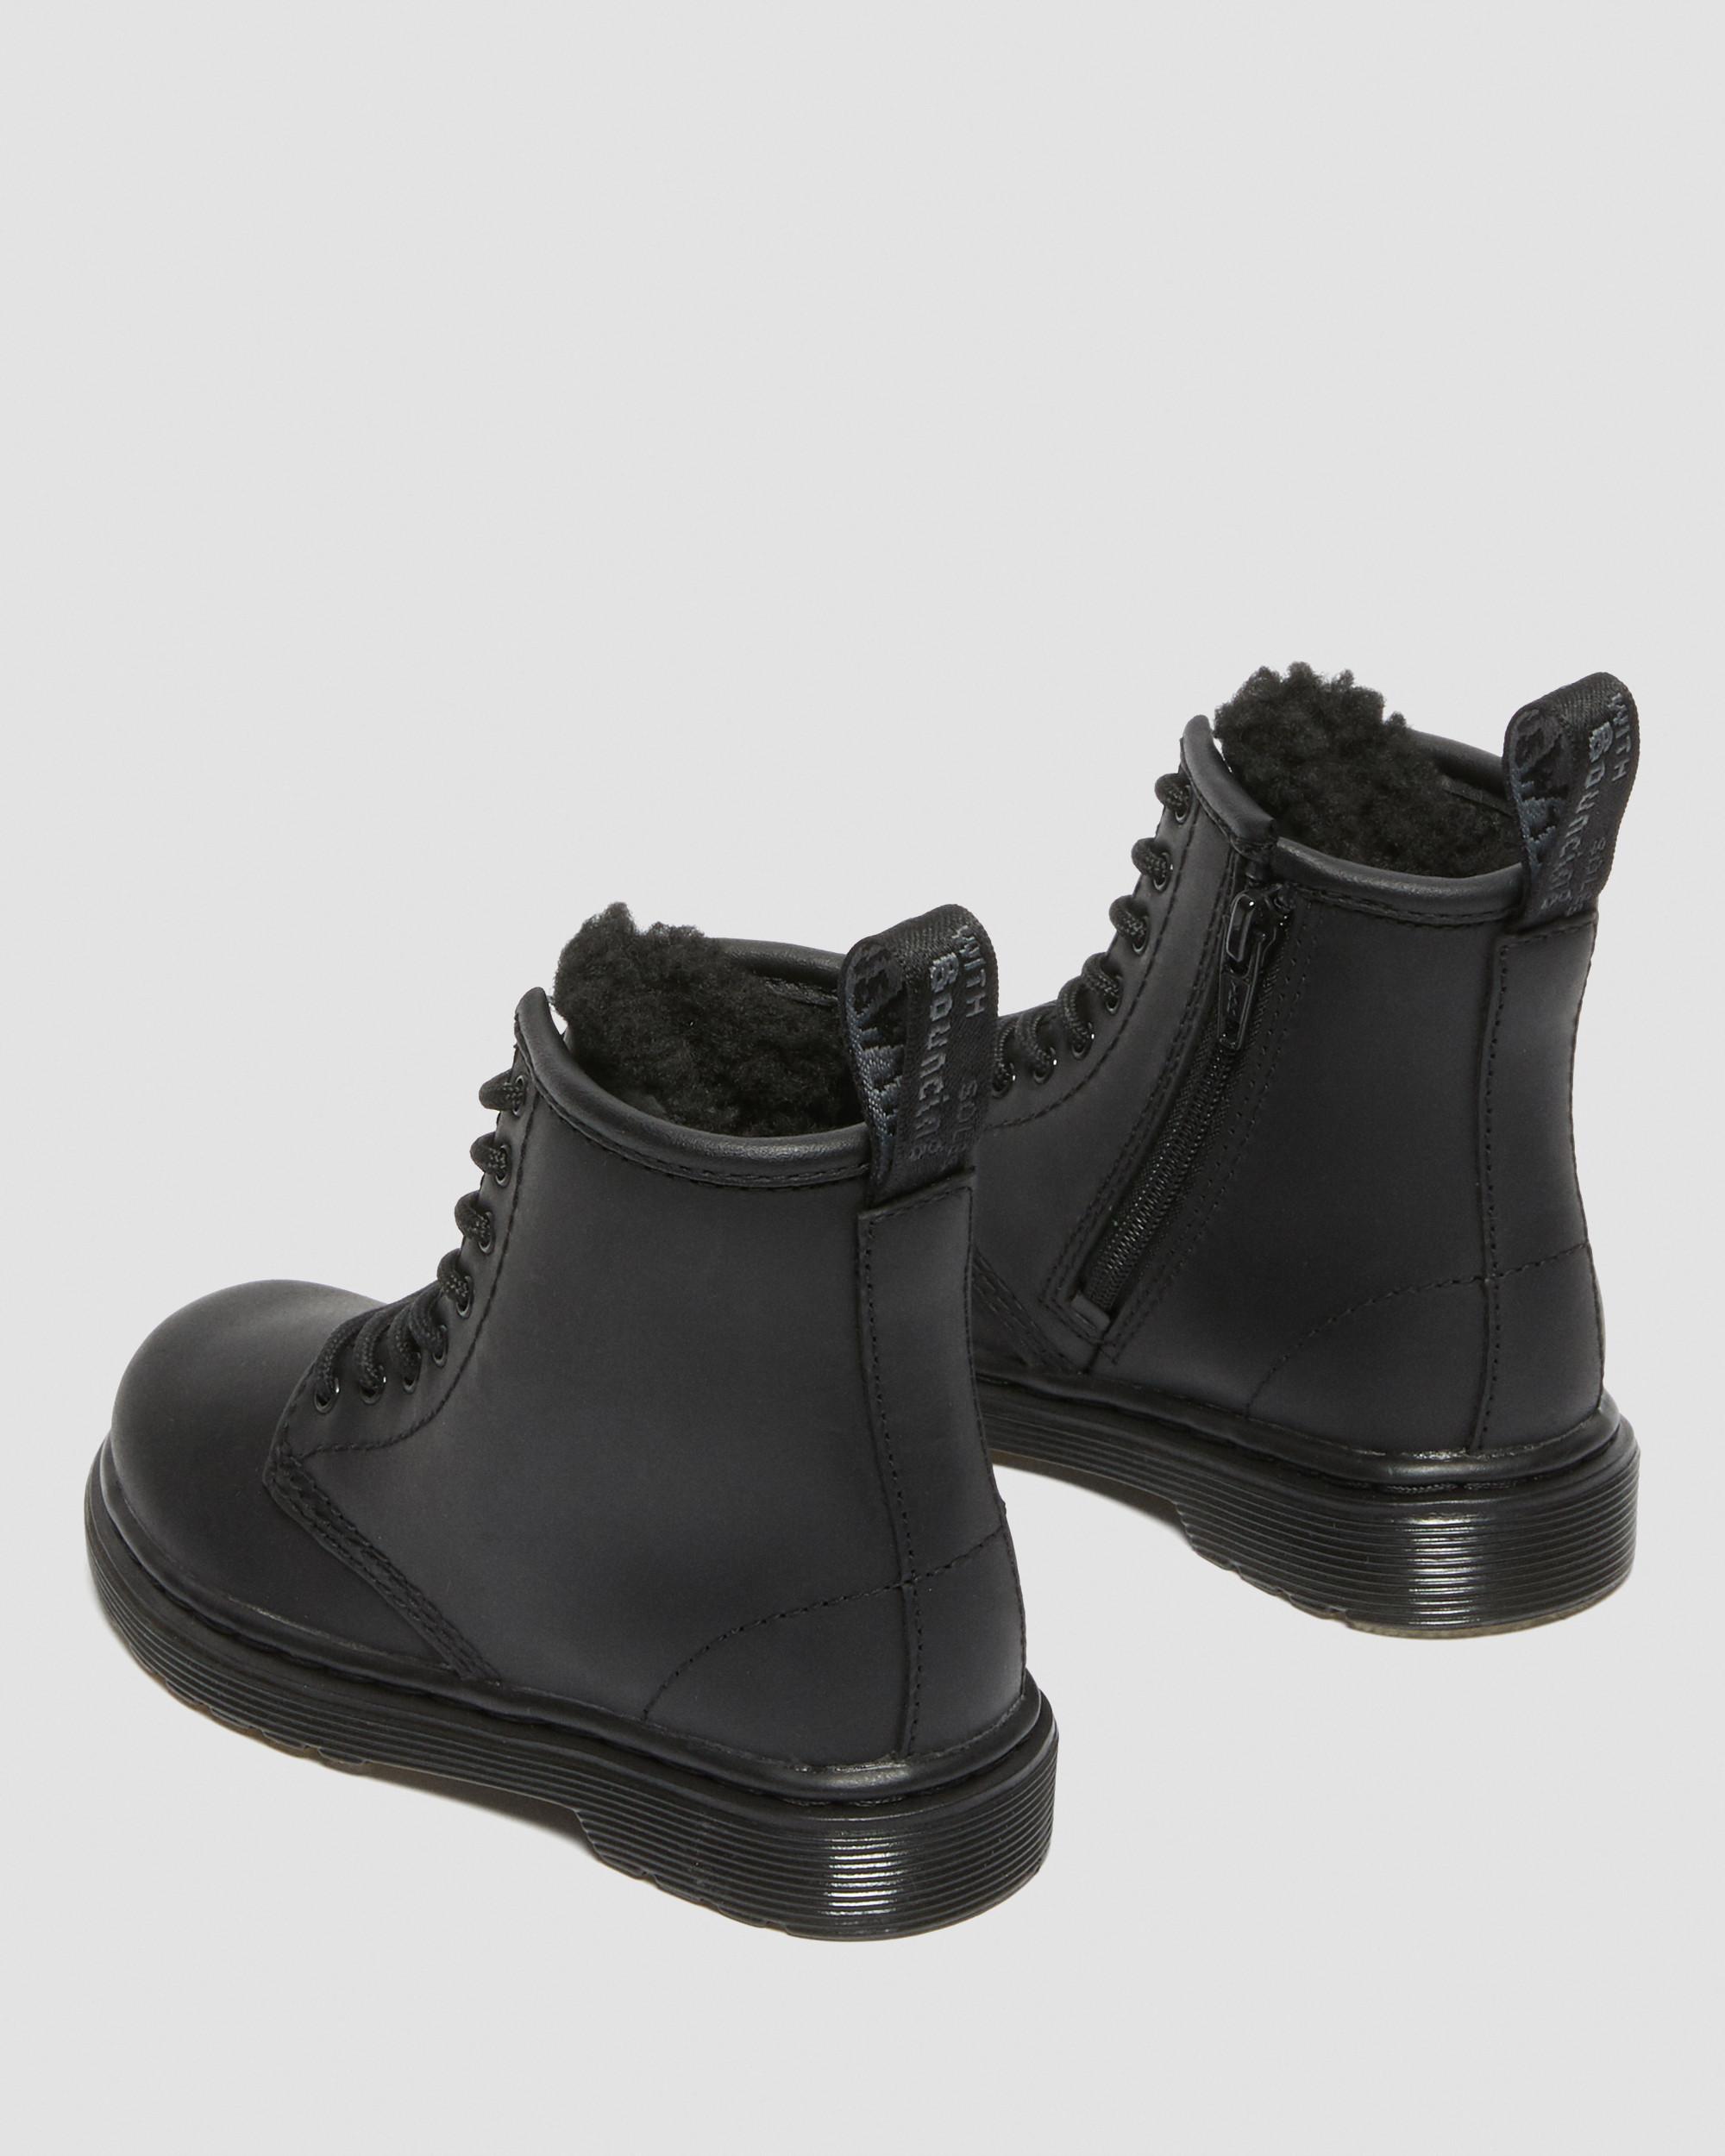 Toddler 1460 Serena Faux Fur Lined Leather Boots in Black